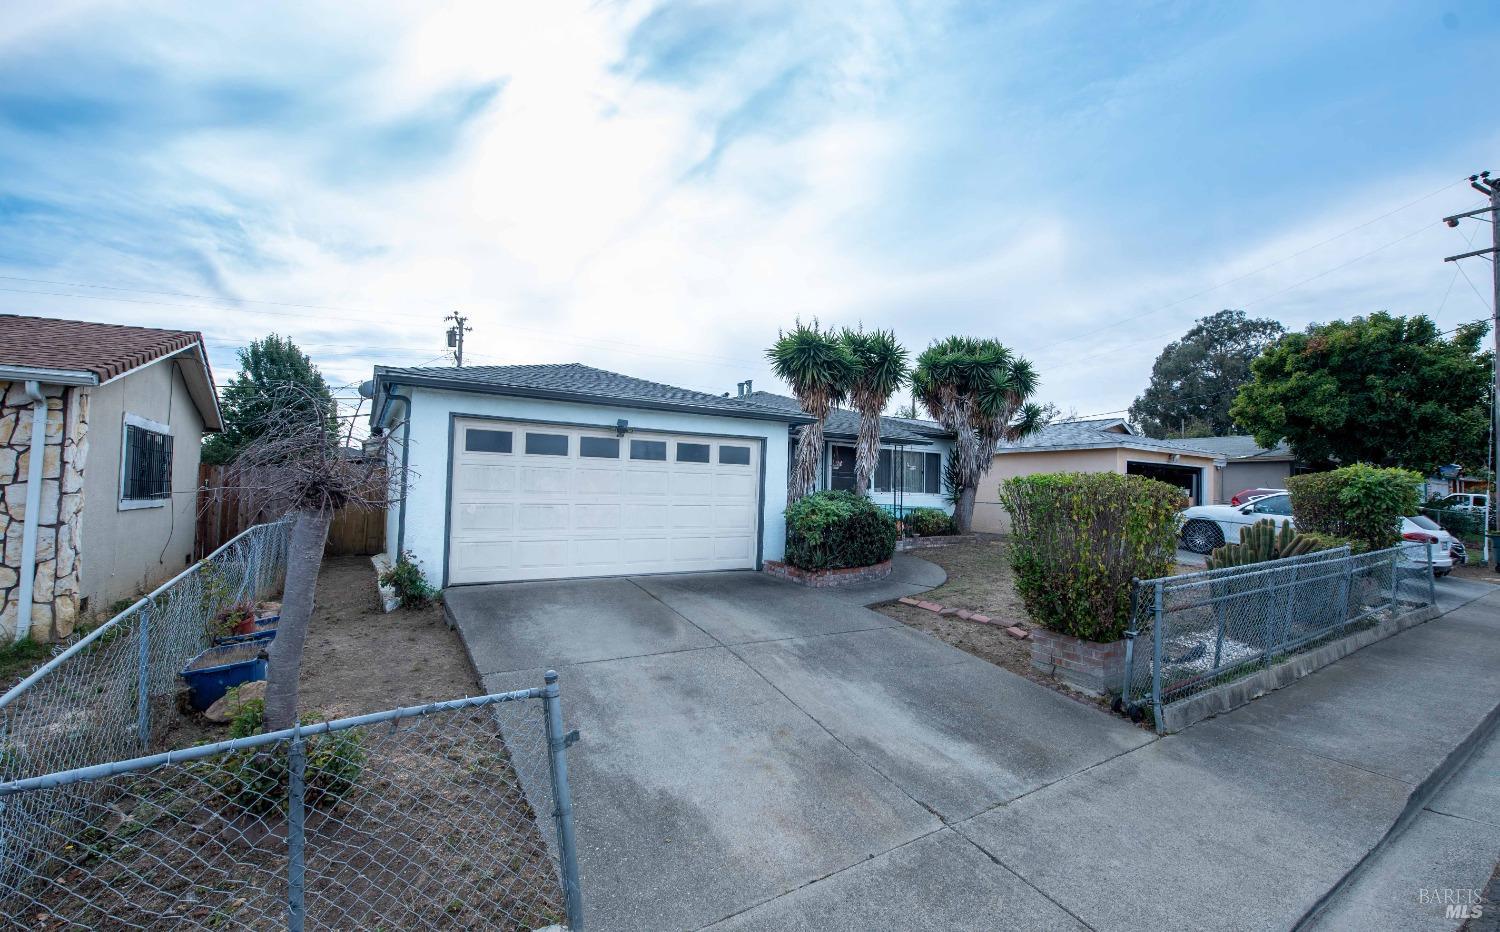 Great Value and spacious single-story home in Vallejo that includes a solar system! Situated on a sp